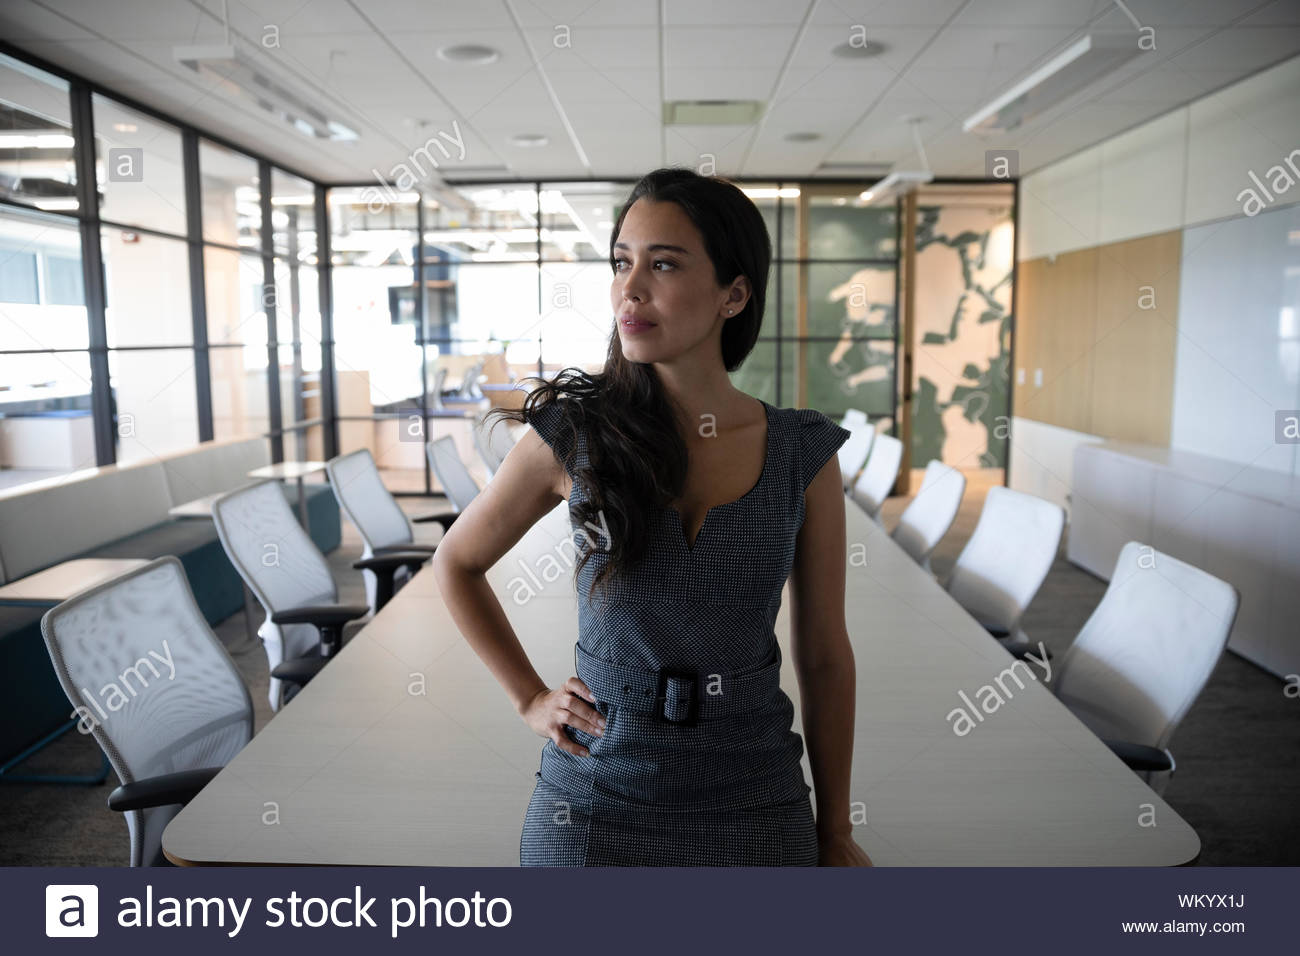 Portrait of businesswoman in office with hand on hip Stock Photo